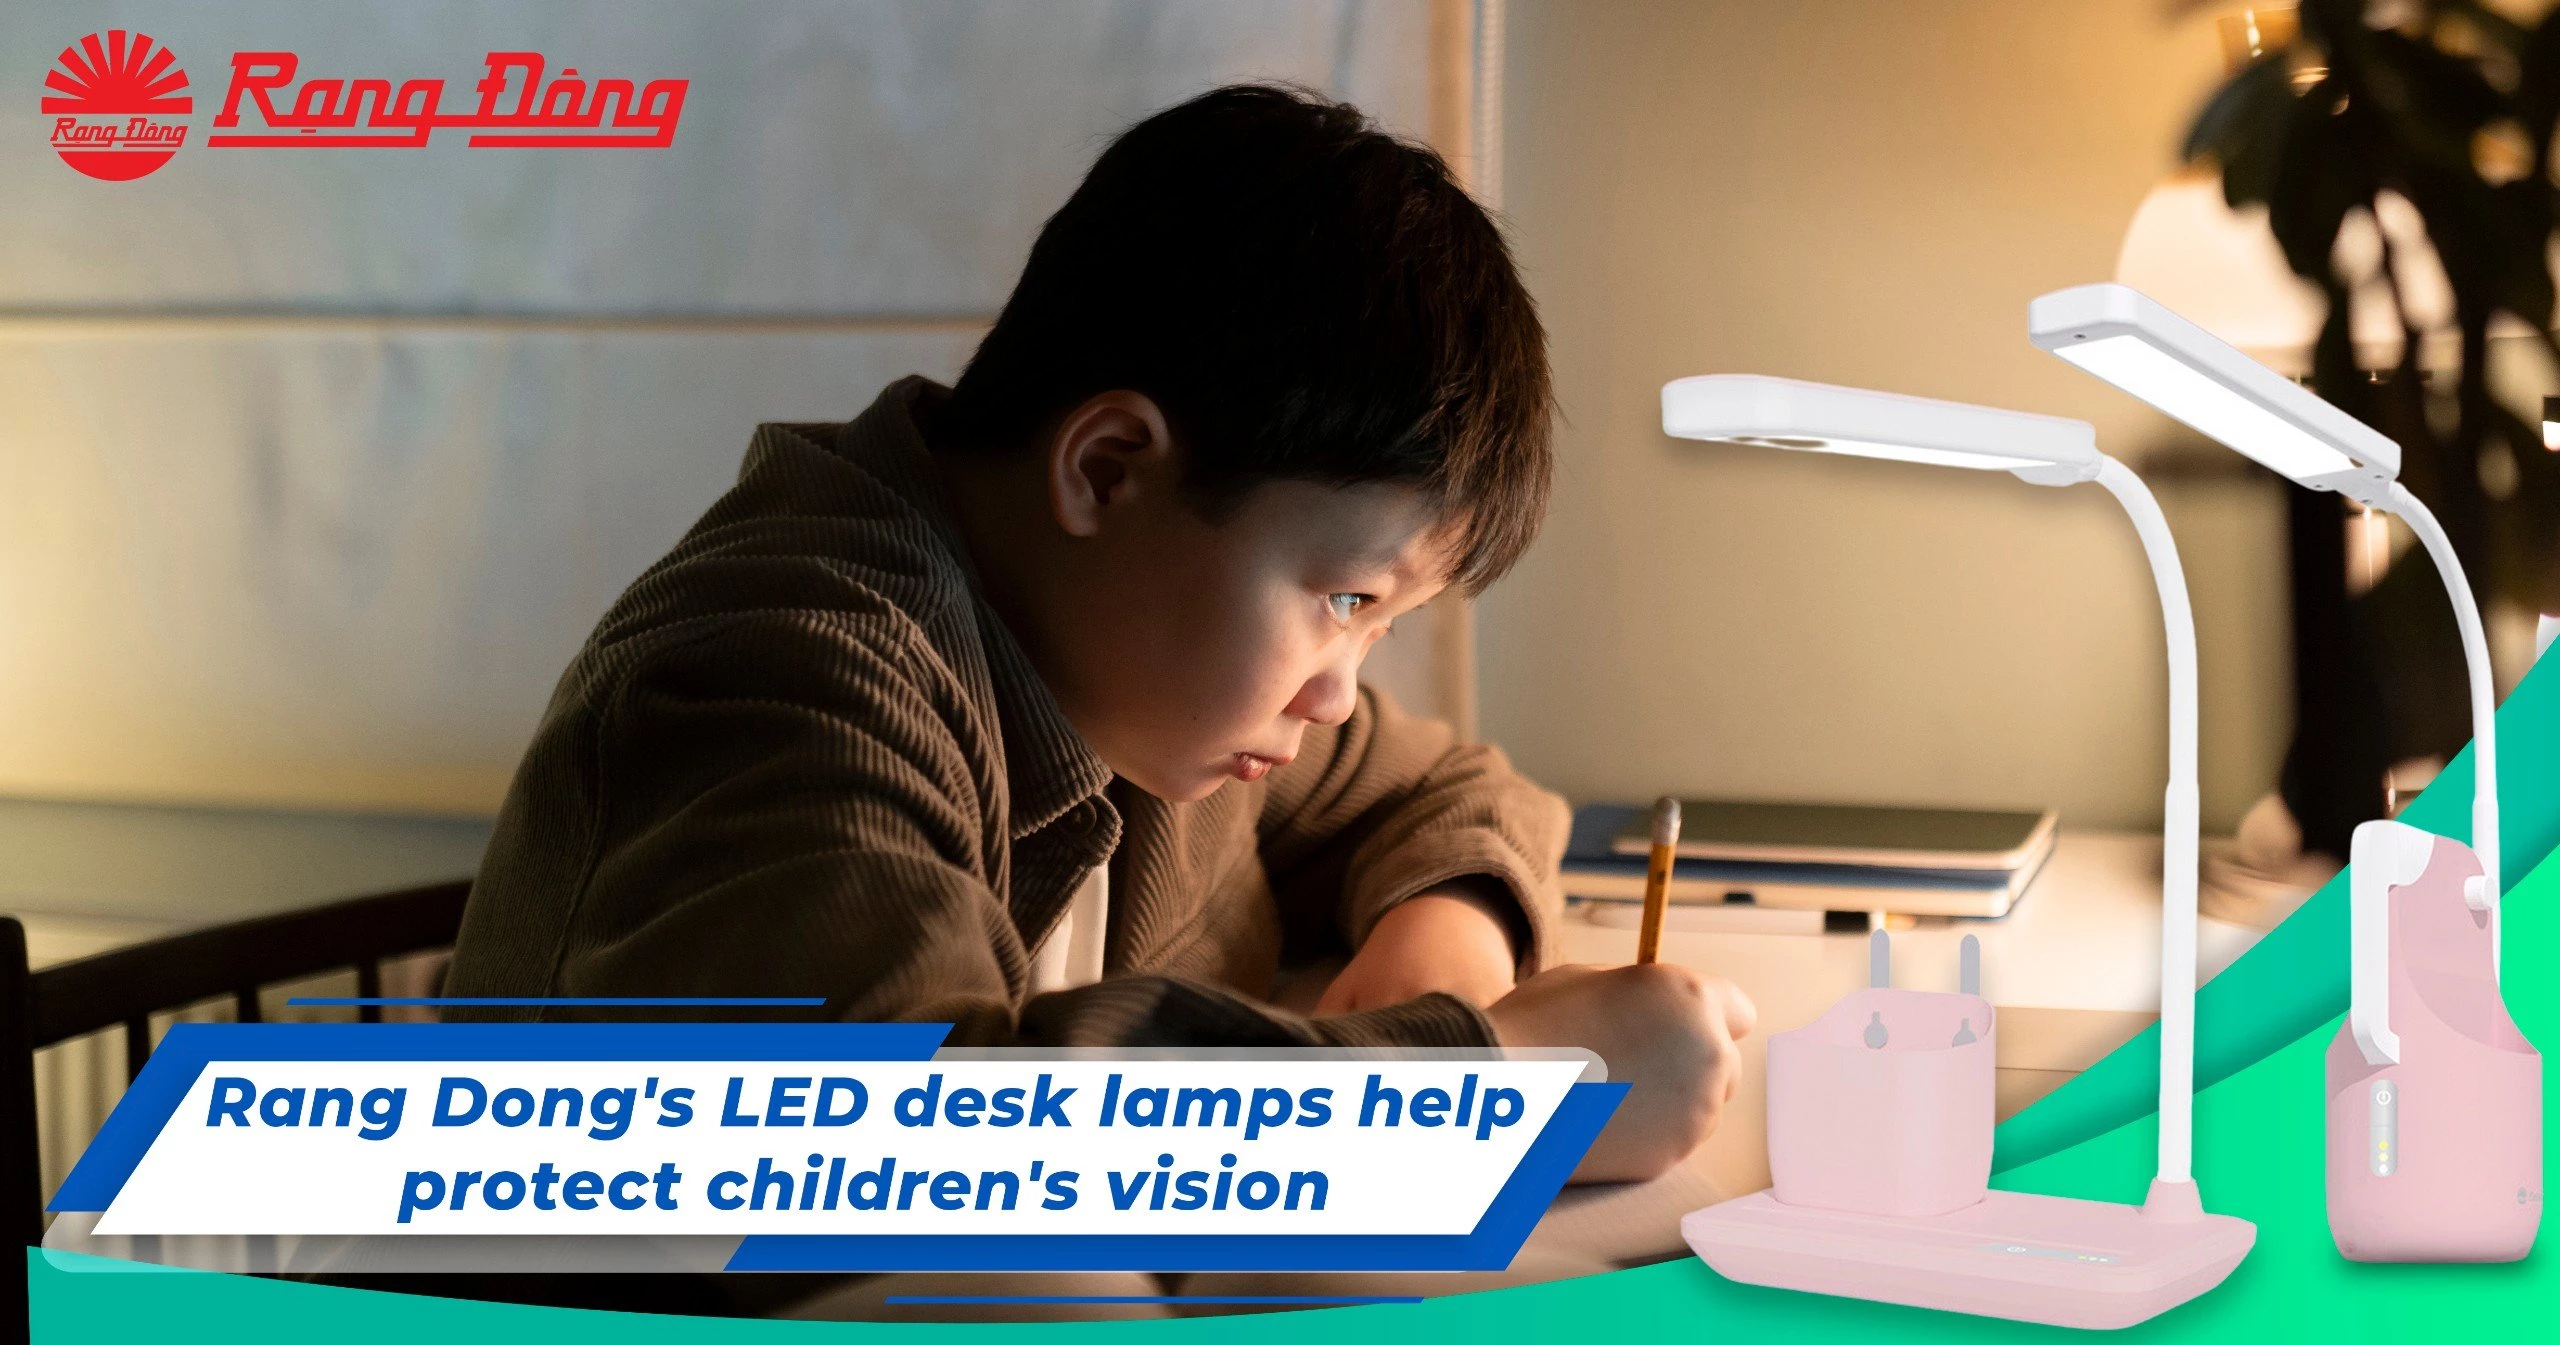 Rang Dong's LED desk lamps help protect children's vision